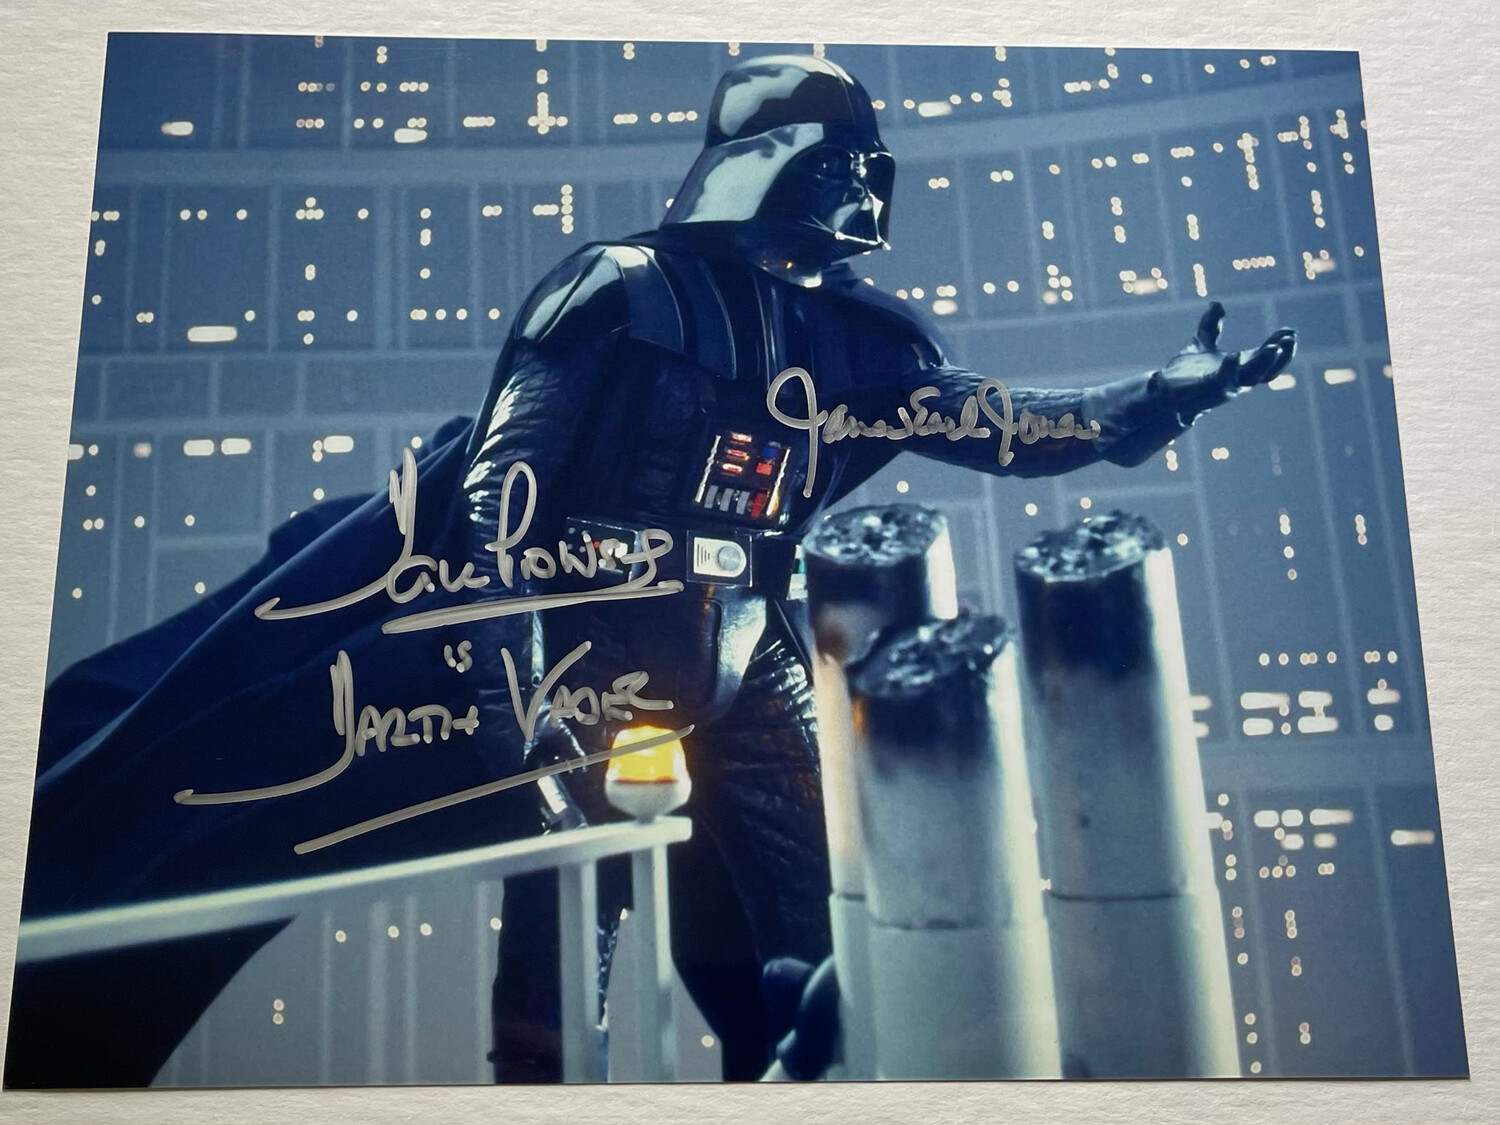 8X10 DARTH VADER PHOTO SIGNED BY DAVE PROWSE AND JAMES EARL JONES